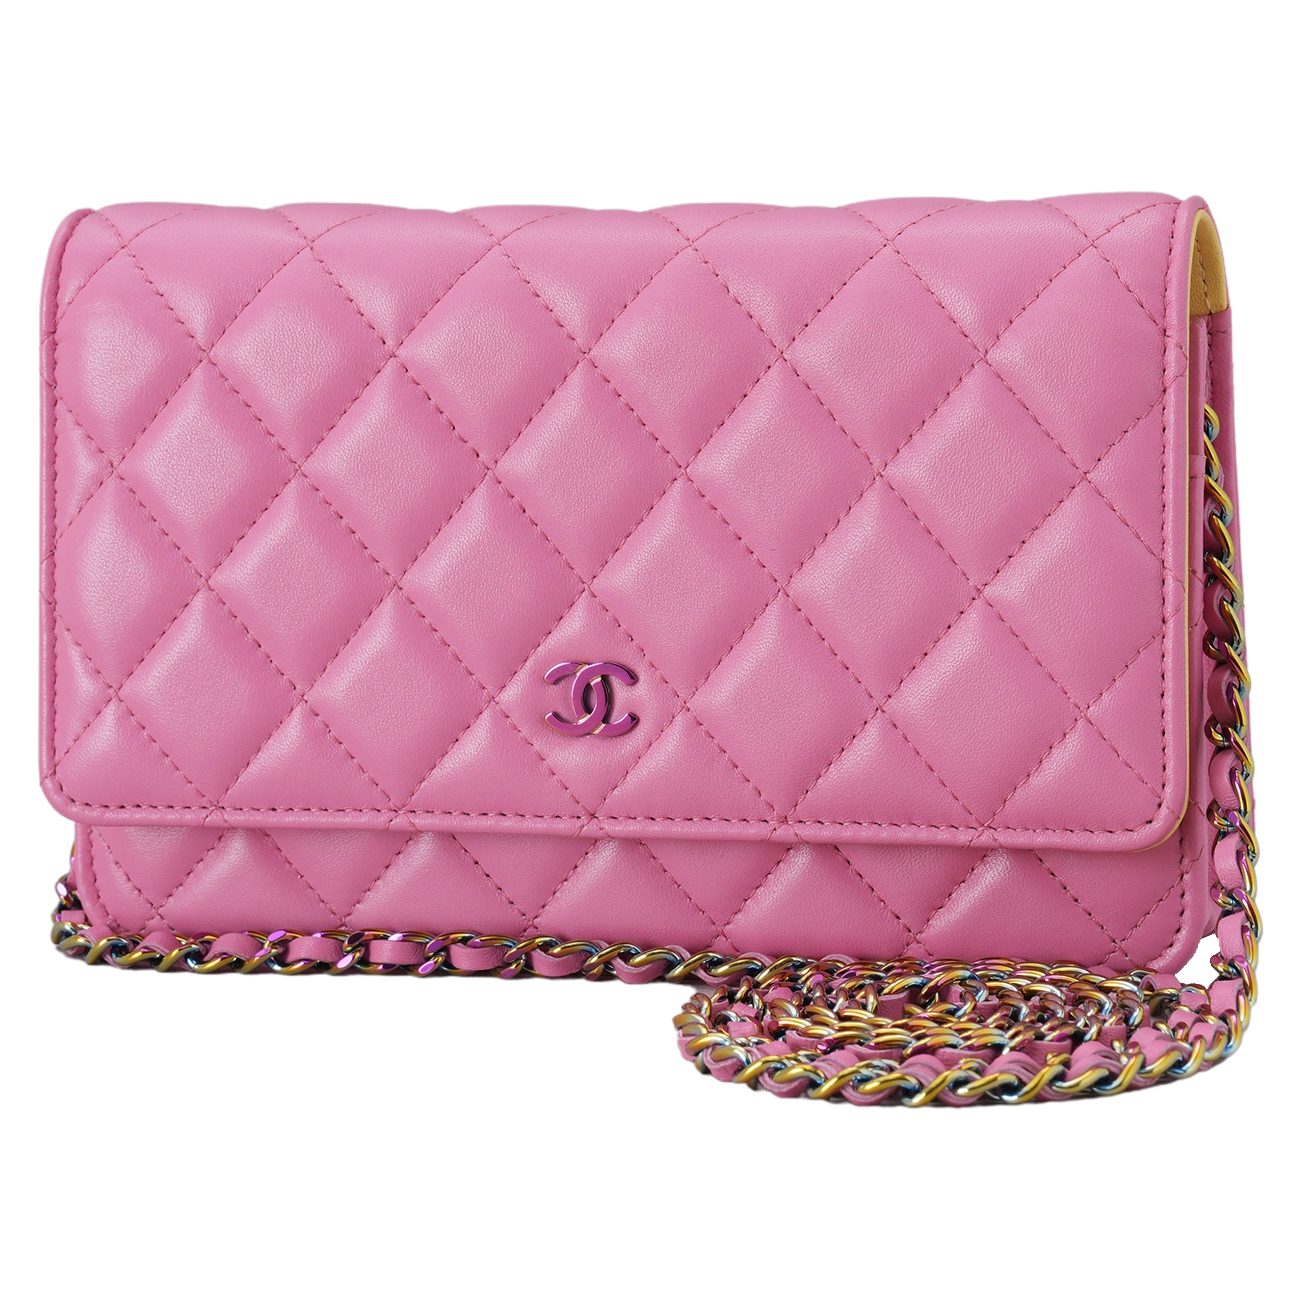 CHANEL(USED)샤넬 AP0250 클래식 램스킨 WOC